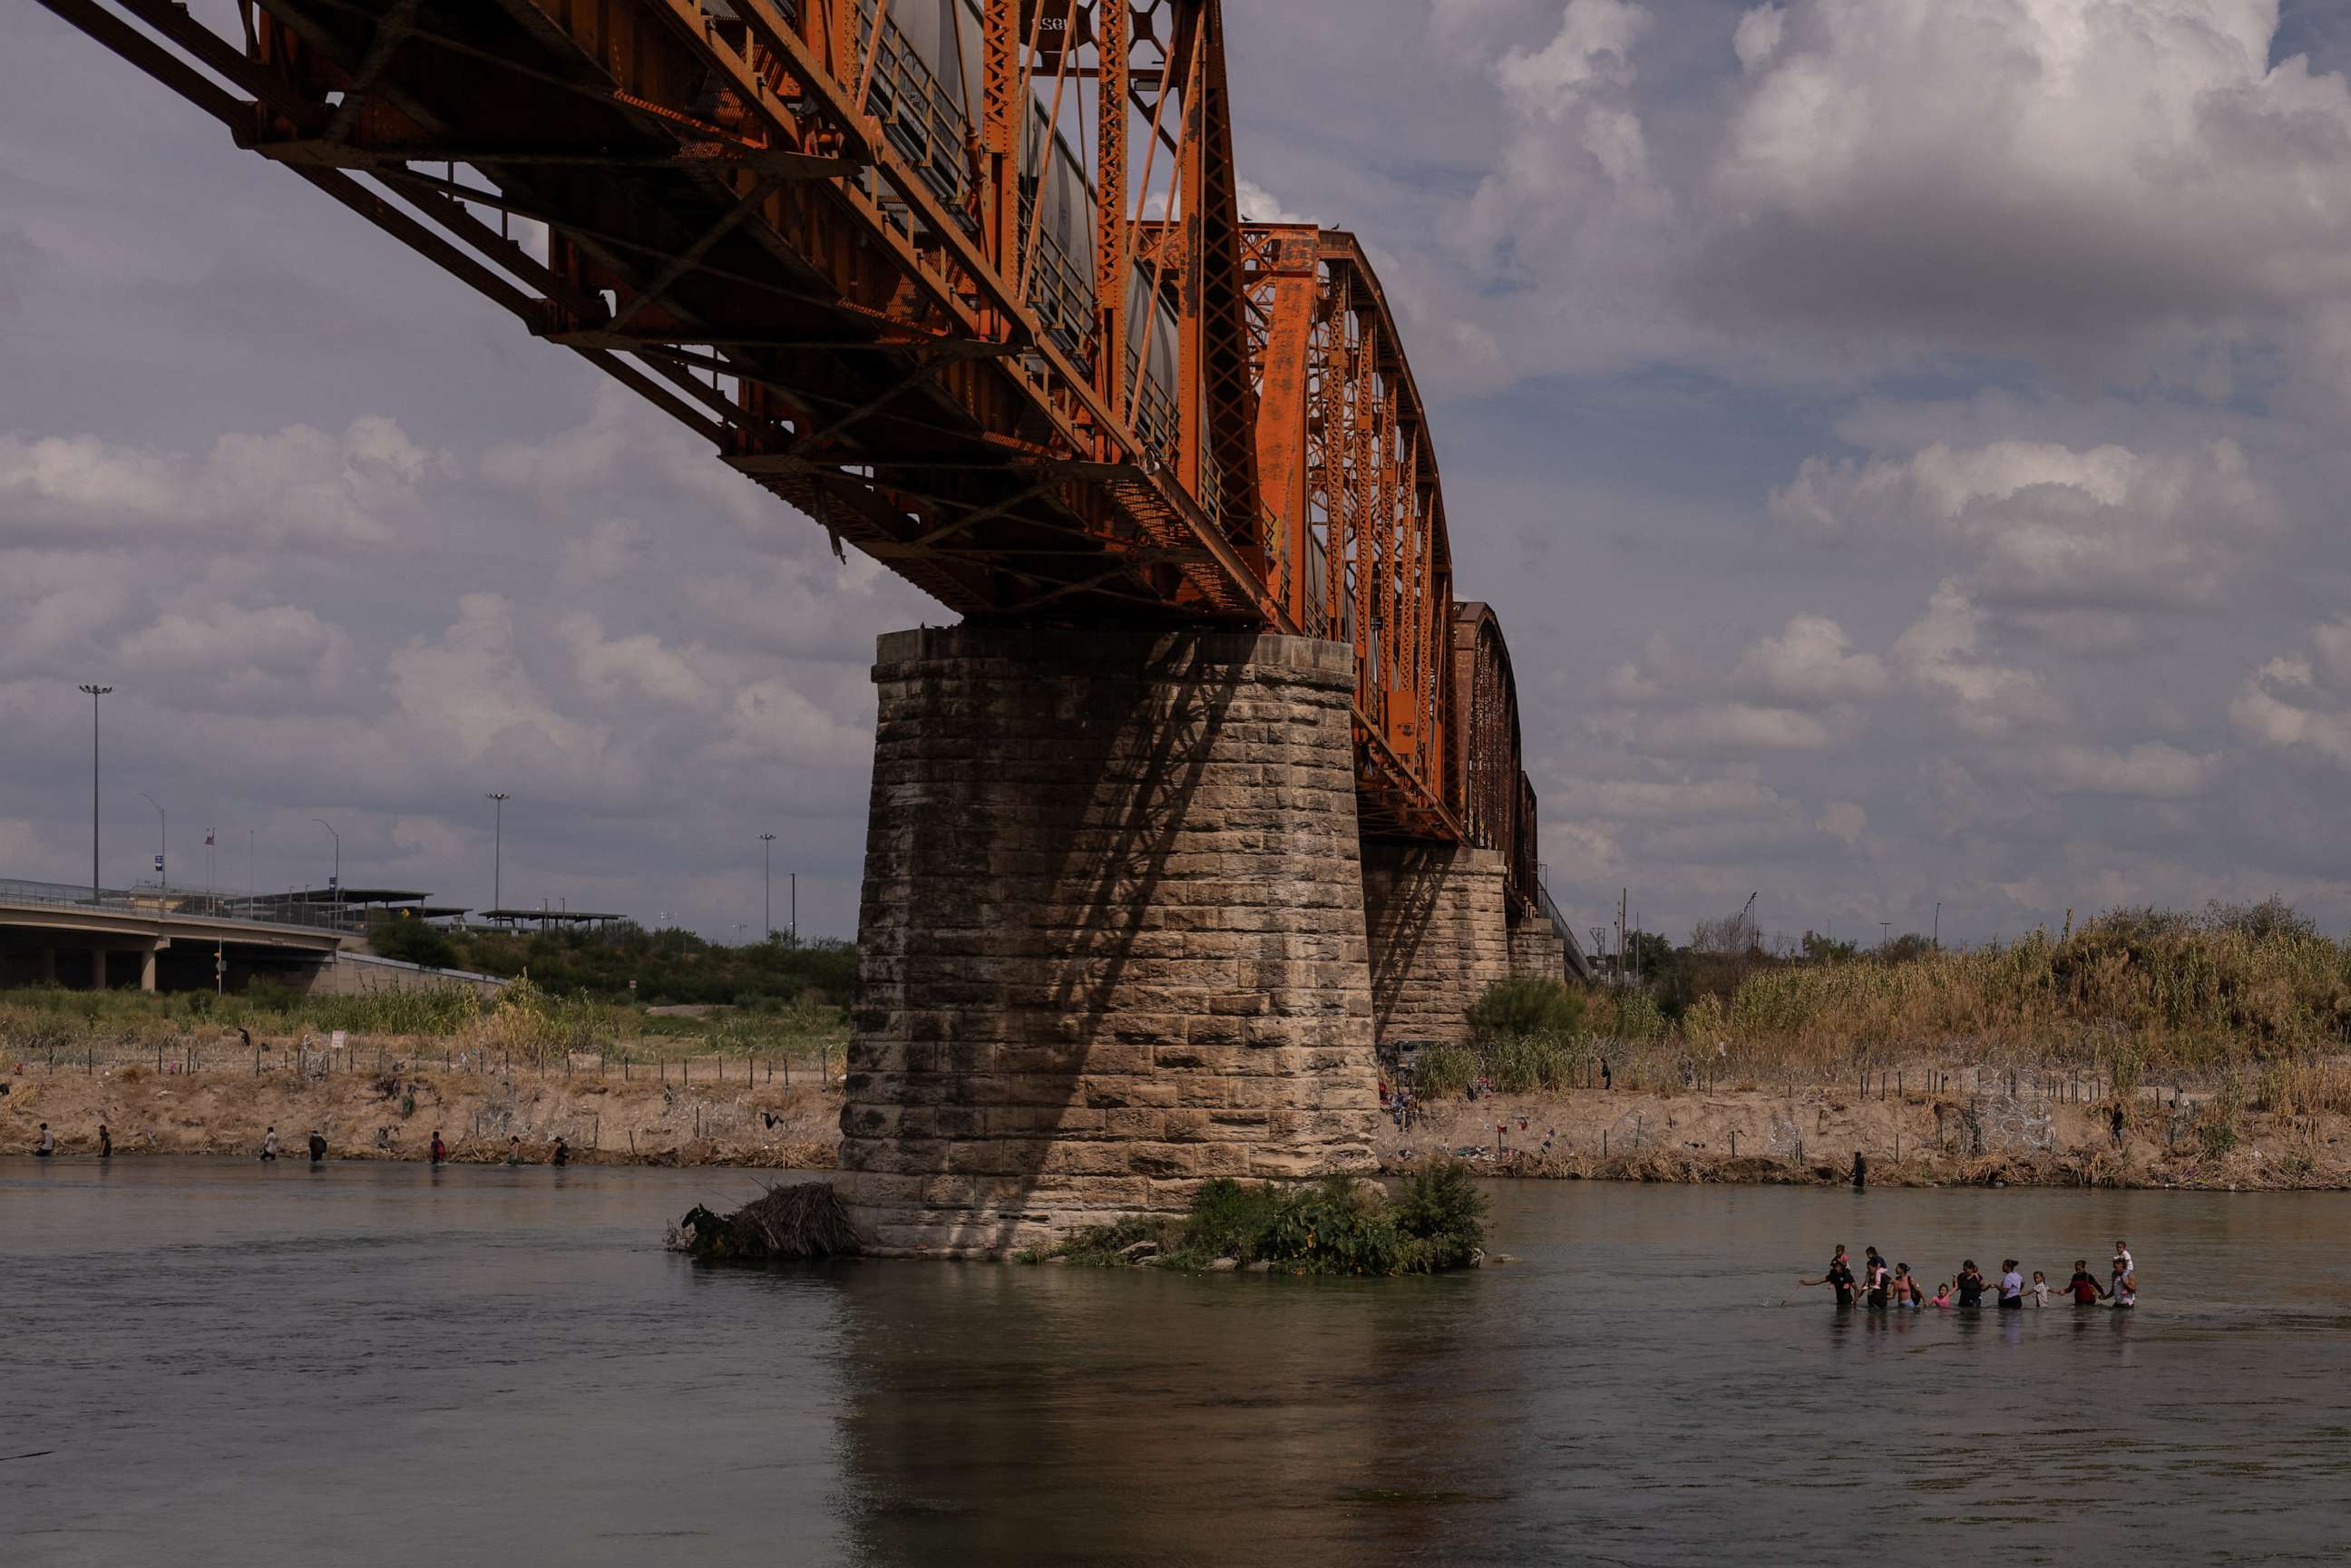 PHOTO: Migrants wade past the Puente Negro Ferrocarril train bridge while navigating the Rio Grande river for an entry point into Eagle Pass, U.S. as seen from Piedras Negras, Coahuila, Mexico, September 15, 2023.